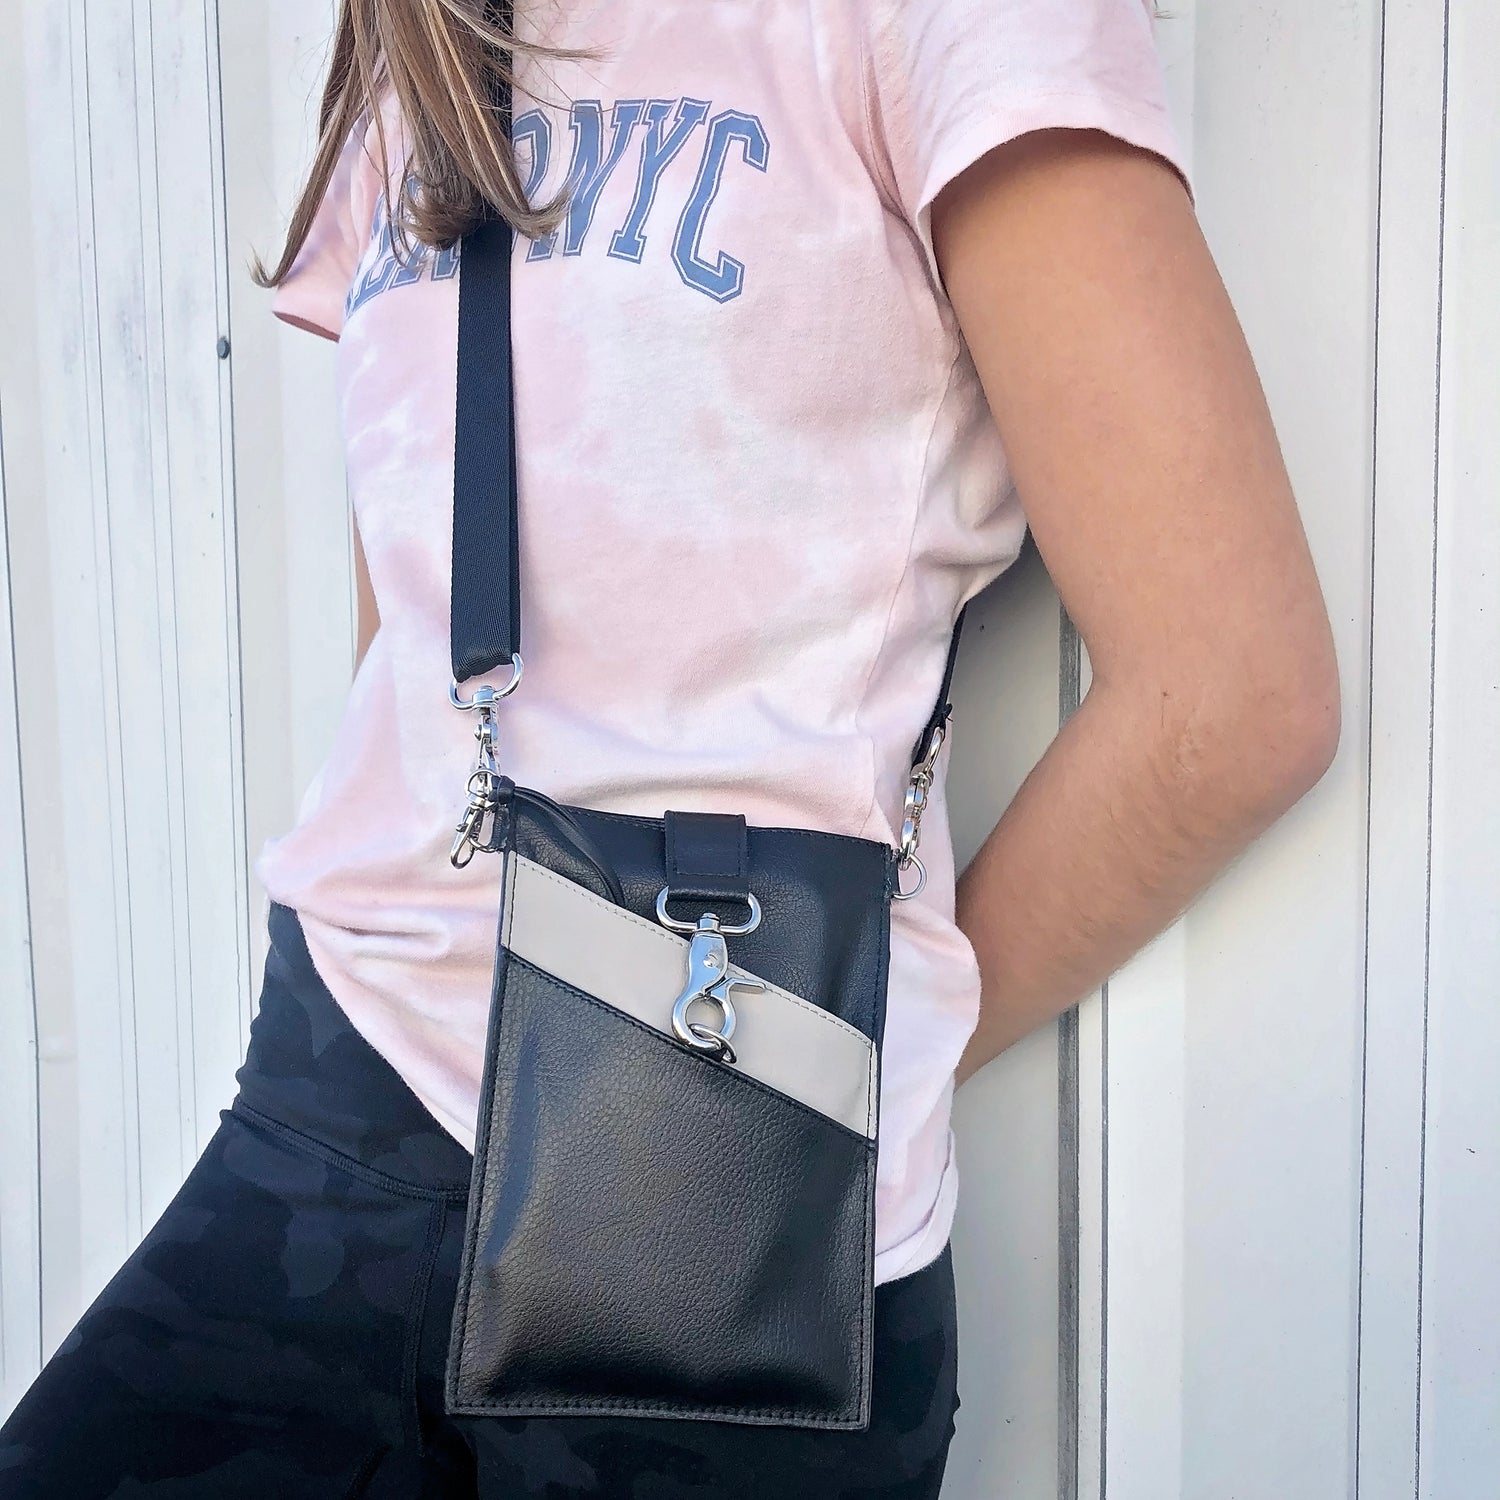 girl with crossbody bag for phone